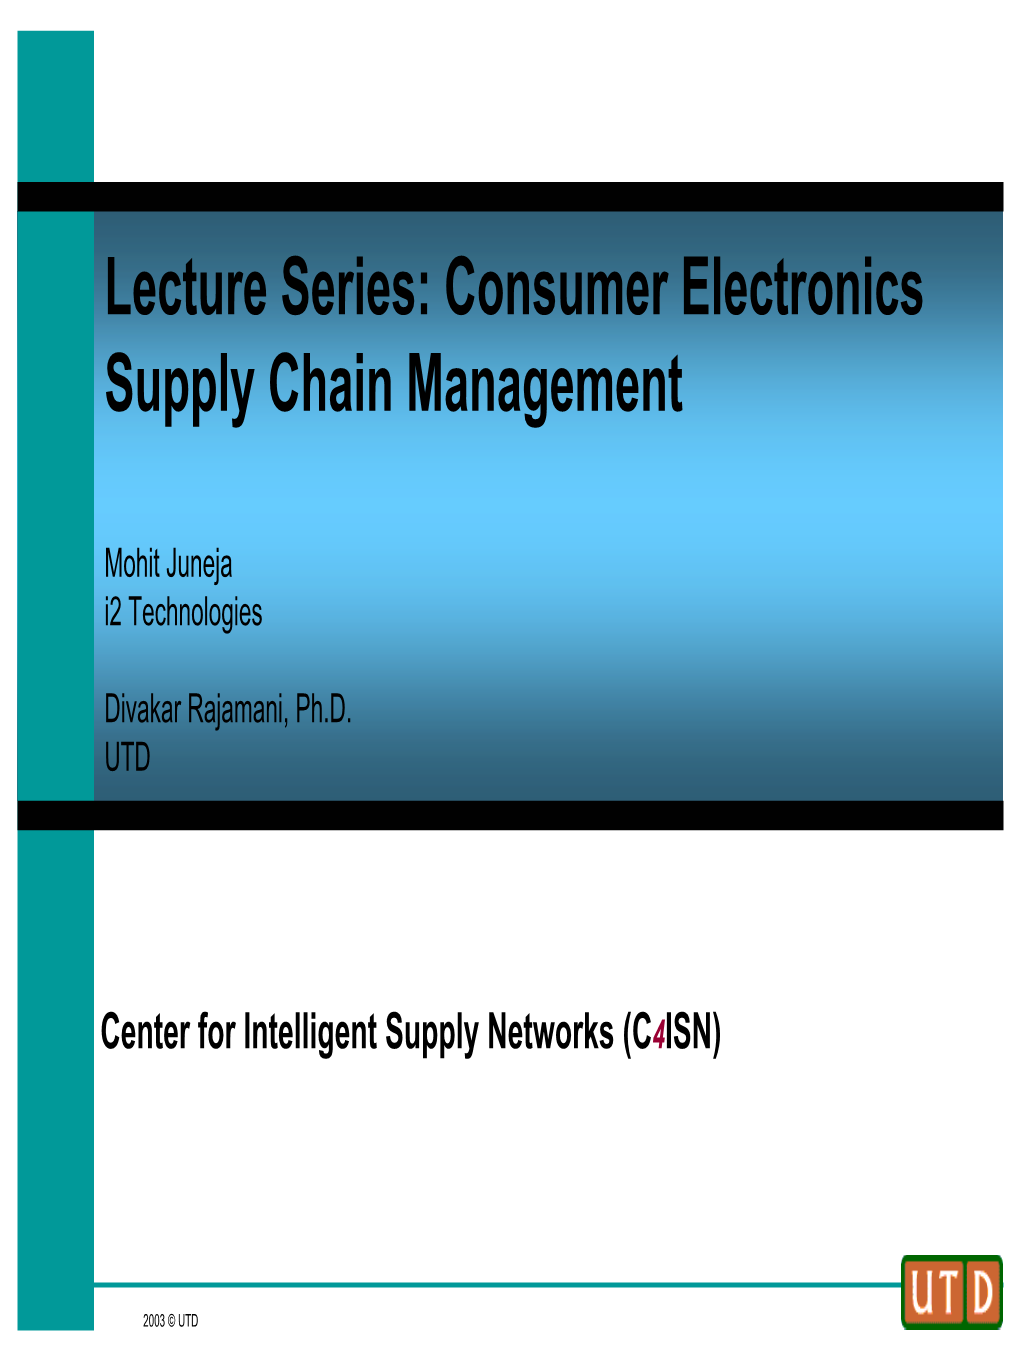 Lecture Series: Consumer Electronics Supply Chain Management